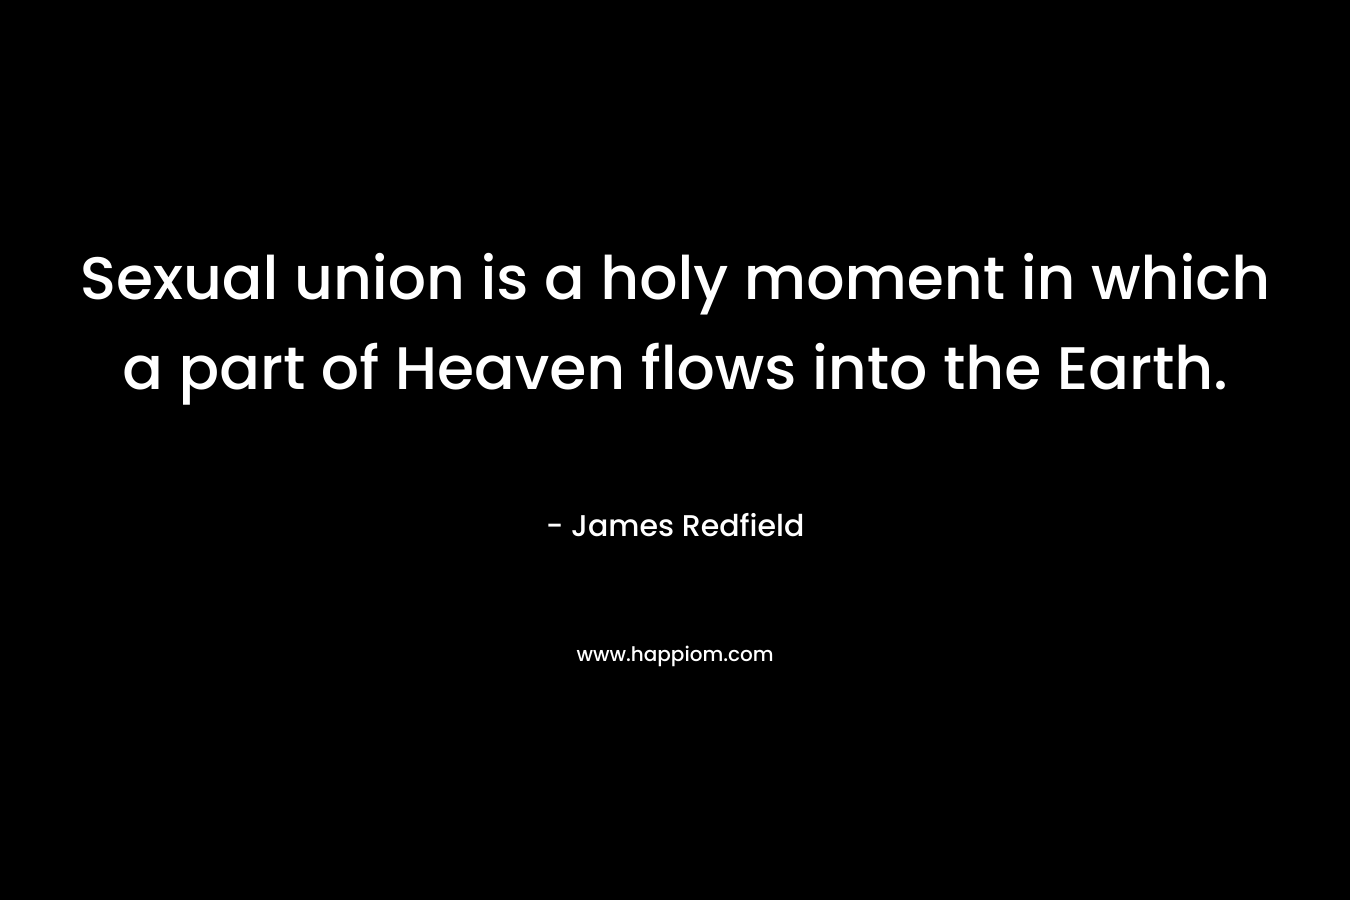 Sexual union is a holy moment in which a part of Heaven flows into the Earth.